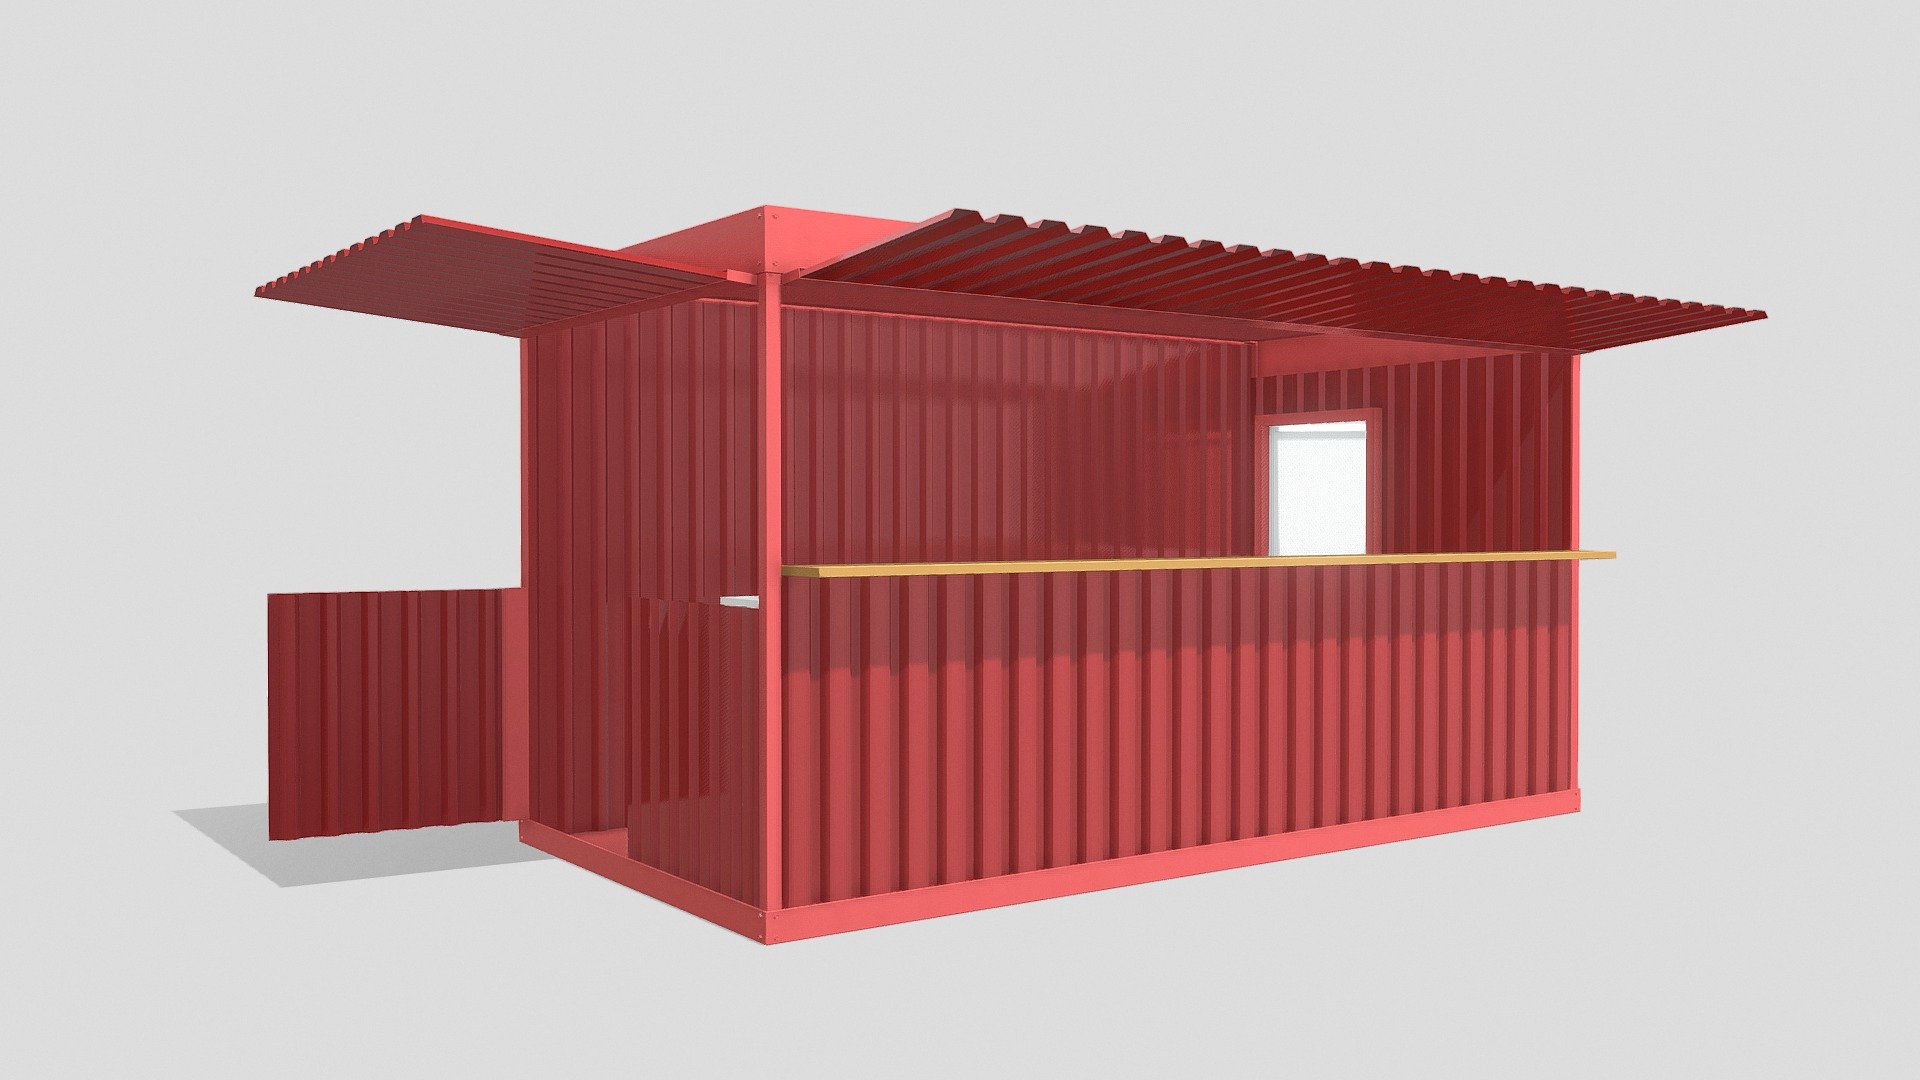 Large Container Kiosk

Measurements:




Closed Container: 4.00m x 2.00m x 2.20m (L,W,H)

Opened Container: 5.47m x 2.88m x 2.20m (L,W,H)

IMPORTANT NOTES:




This model does not have textures or materials, but it has separate generic materials, it is also separated into parts, so you can easily assign your own materials.

Model units are on meters.

If you have any doubts or questions about this model, you can send us a message 3d model